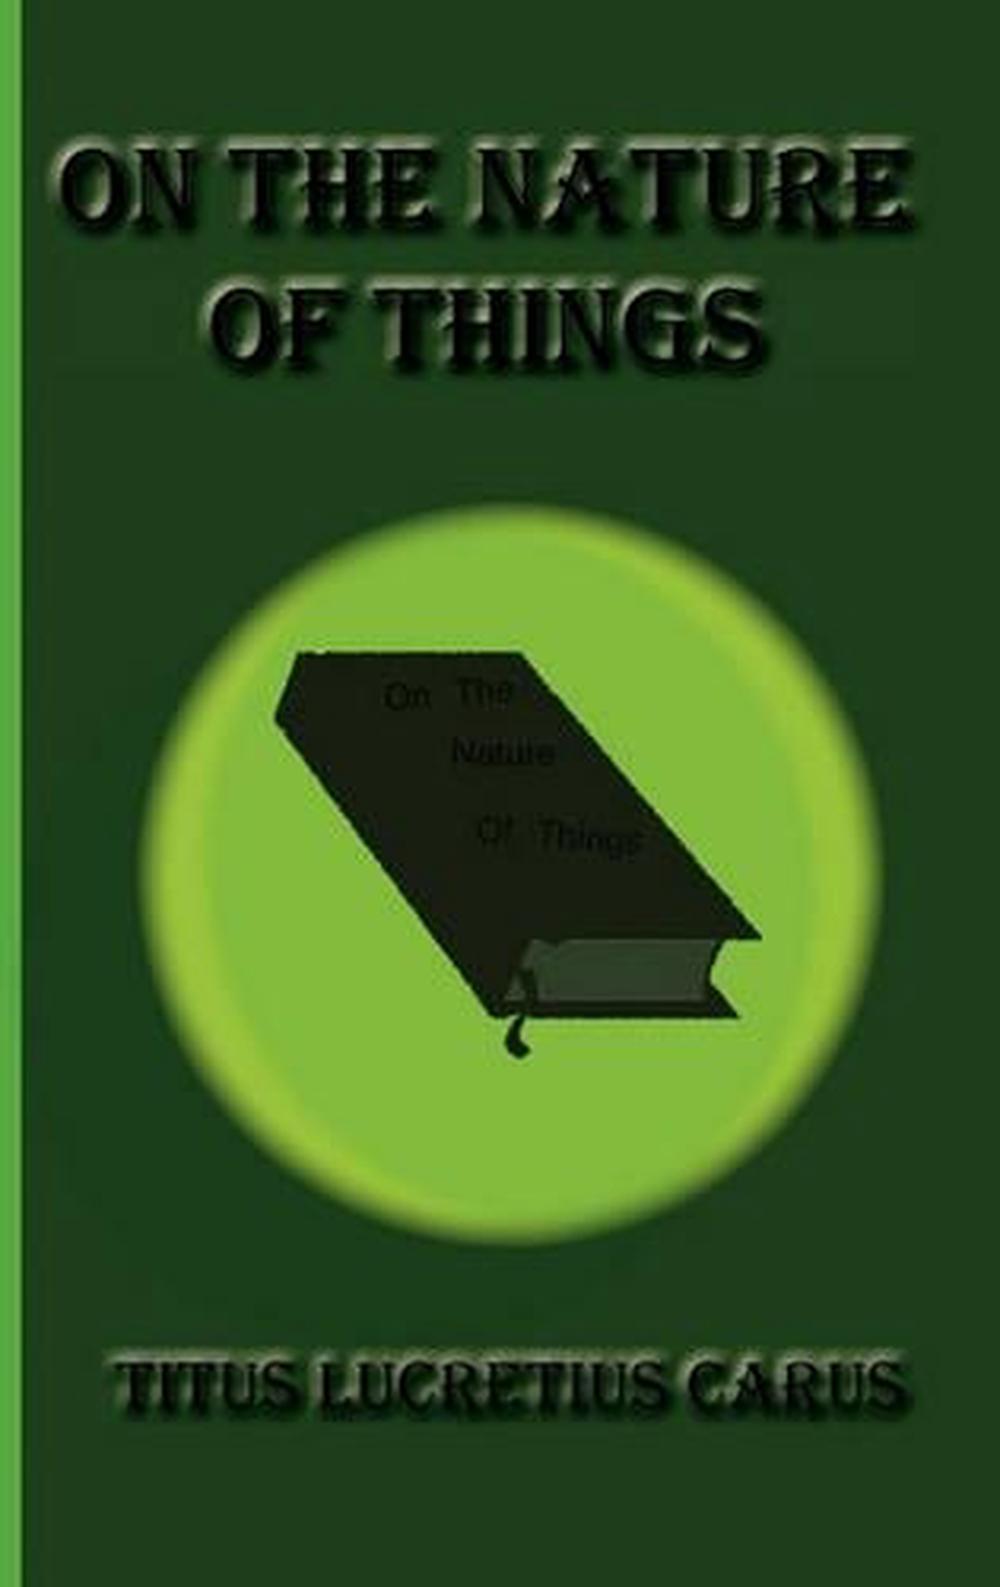 on the nature of things book